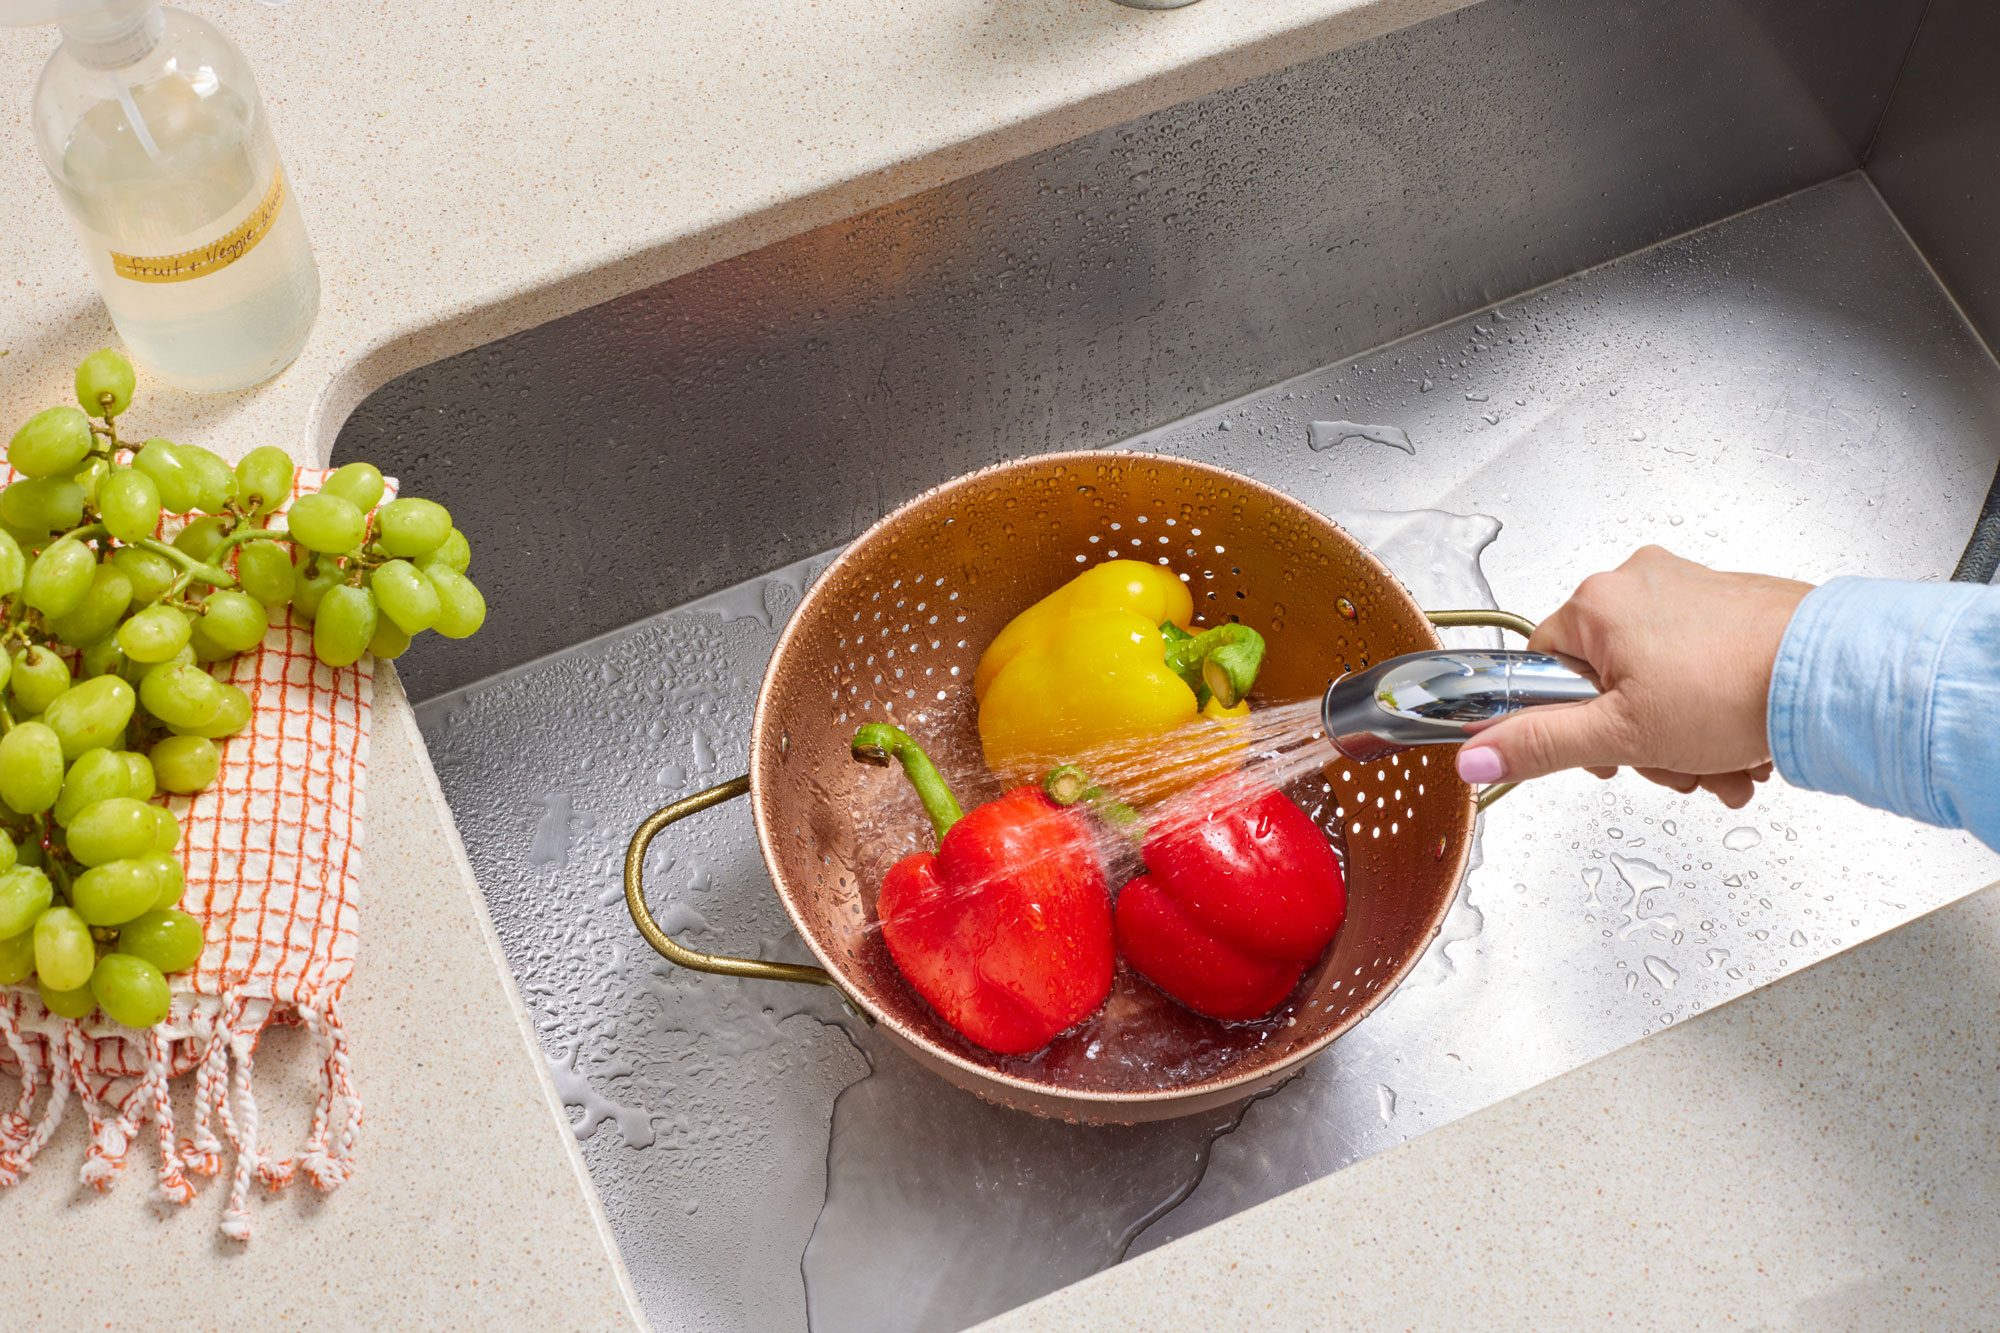 Three peppers are in a colander in a stainless steel sink. A hand uses the spray faucet to rinse them.